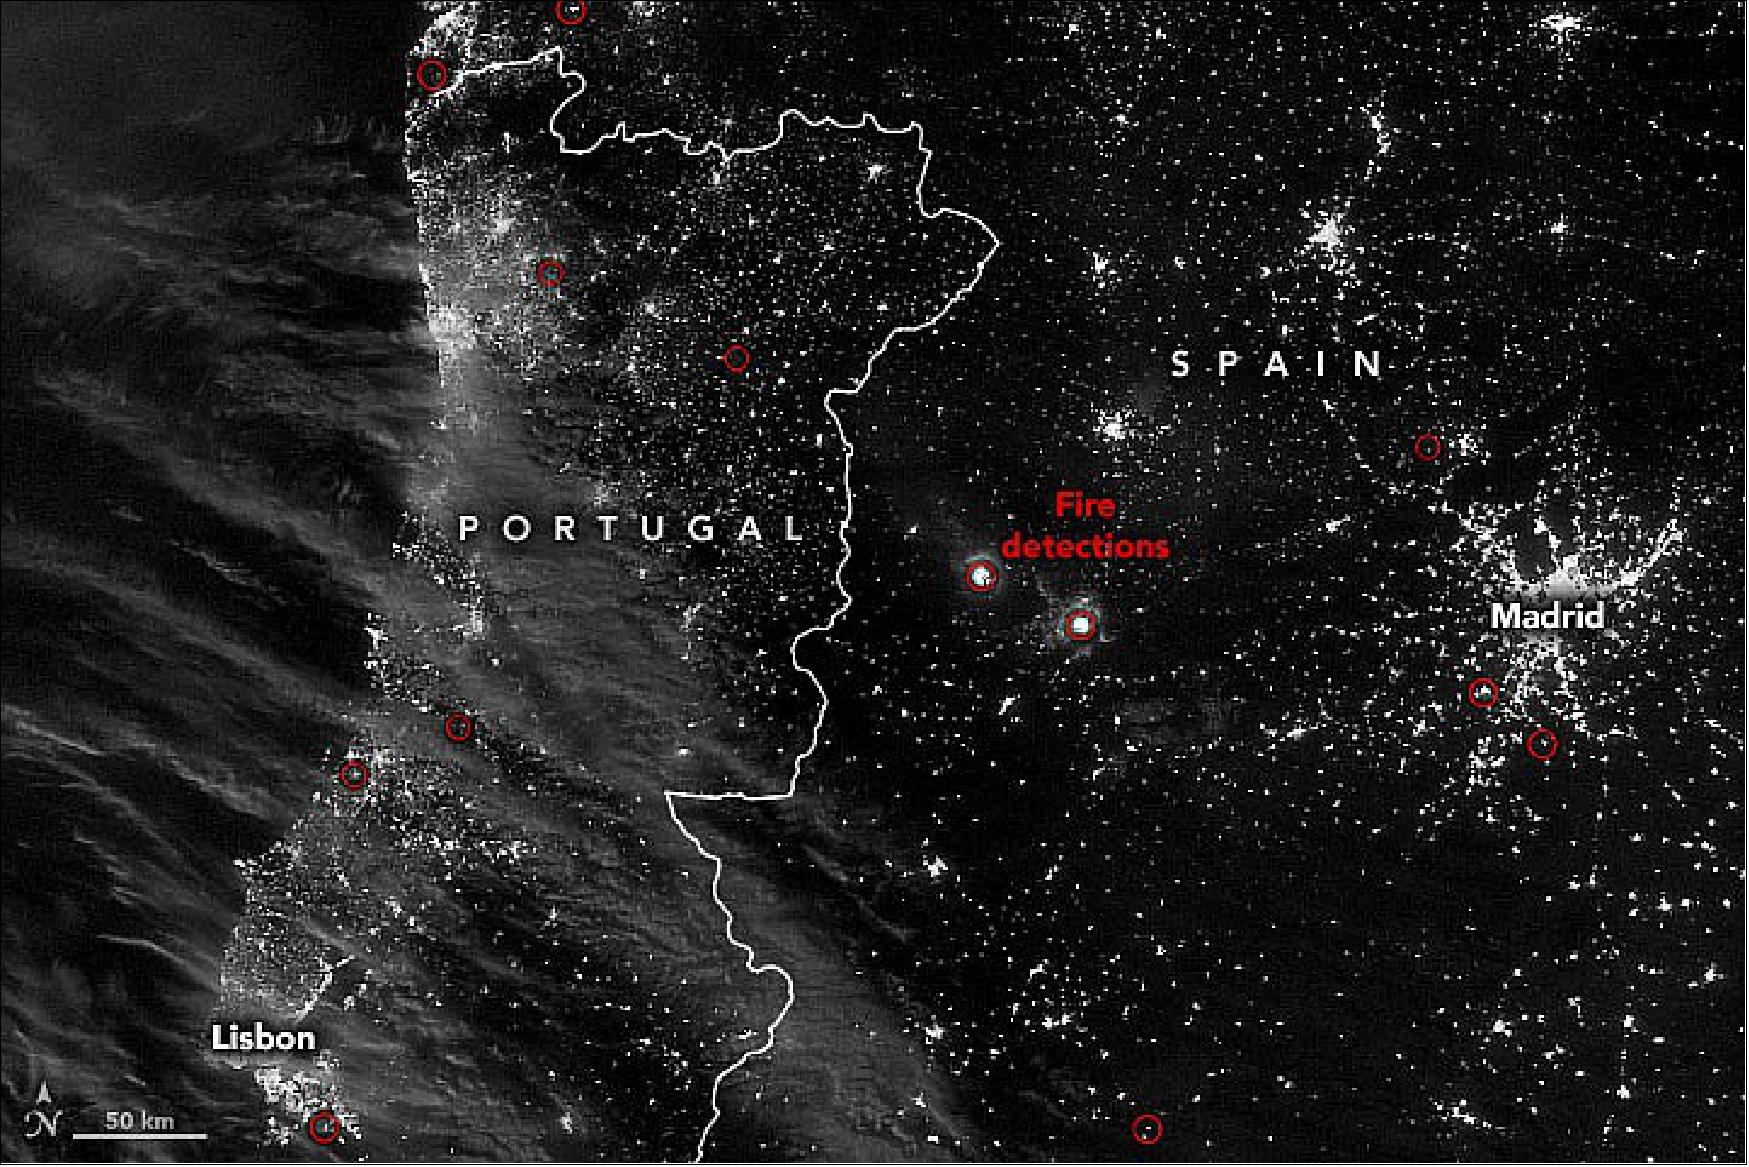 Figure 12: This image shows the locations of fire detections in Portugal and Spain as observed by the Visible Infrared Imaging Radiometer Suite (VIIRS) on the Suomi NPP satellite on July 12, 2022. The prominent fire detections west of Madrid include the town of Las Hurdes where more than 1,500 hectares (3,700 acres) have burned (image credit: NASA Earth Observatory)